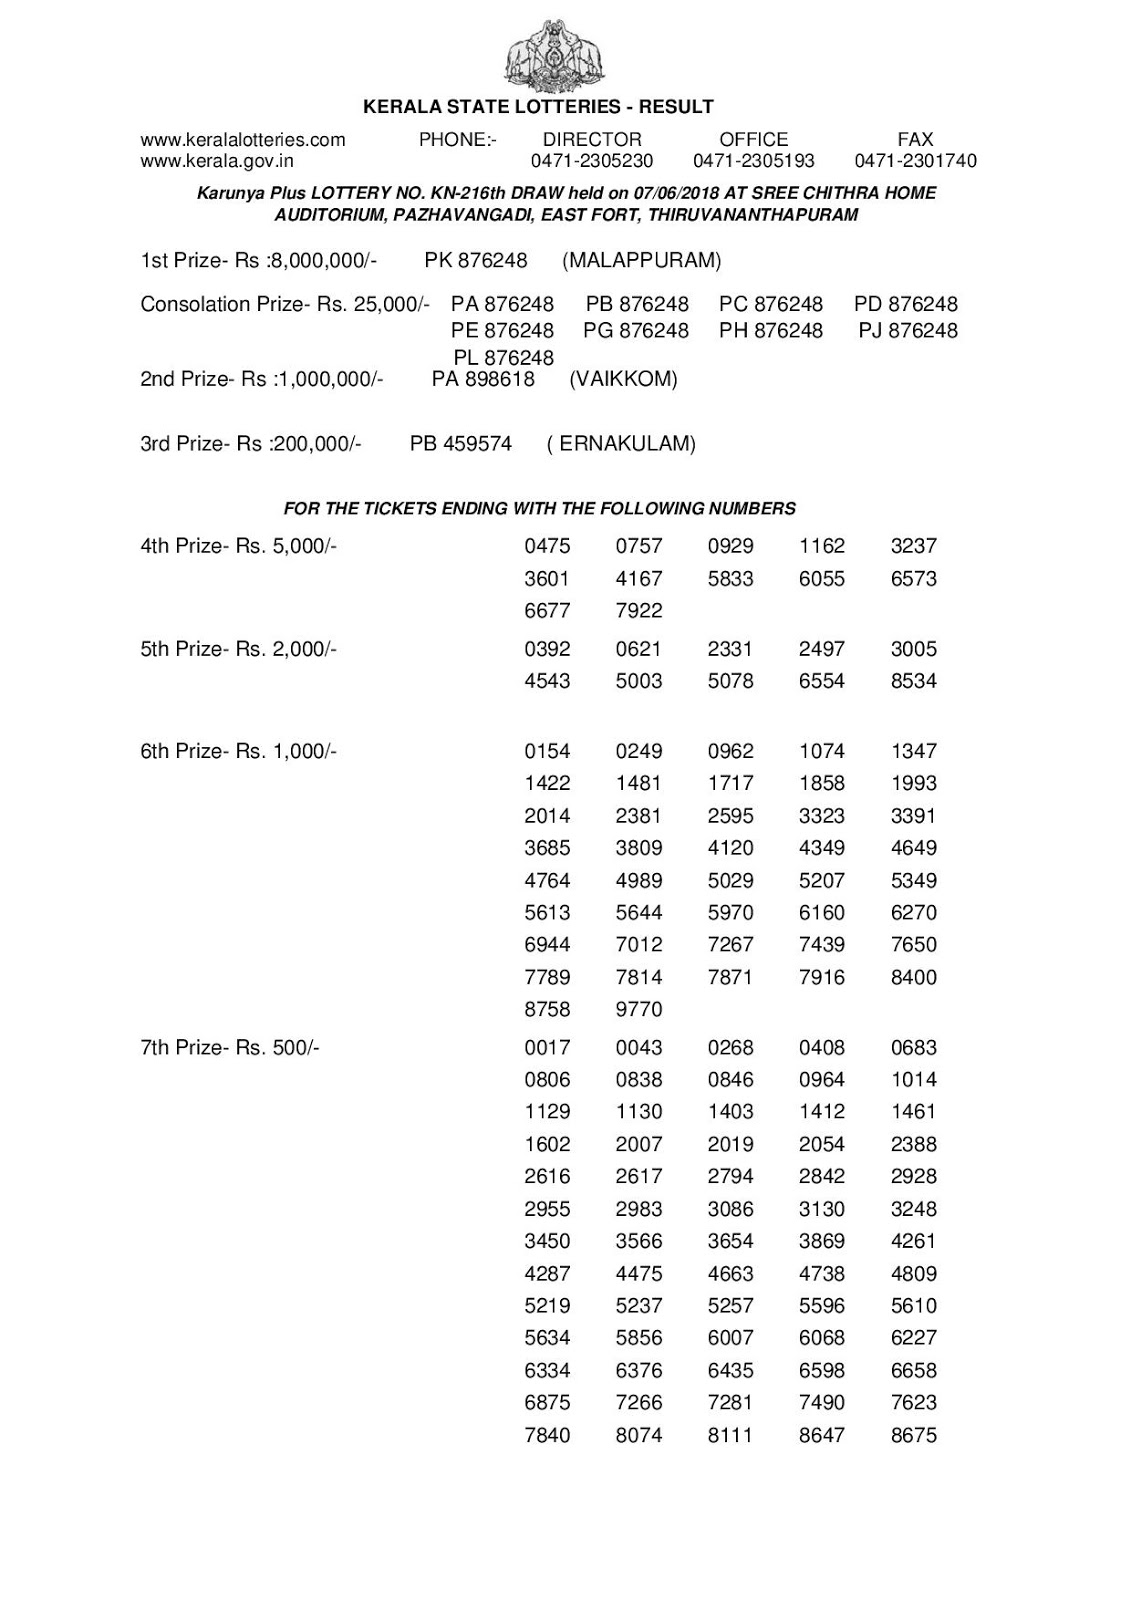 Kerala Lottery Results Today 07.06.2018 Official PDF: Karunya Plus KN-216 Result